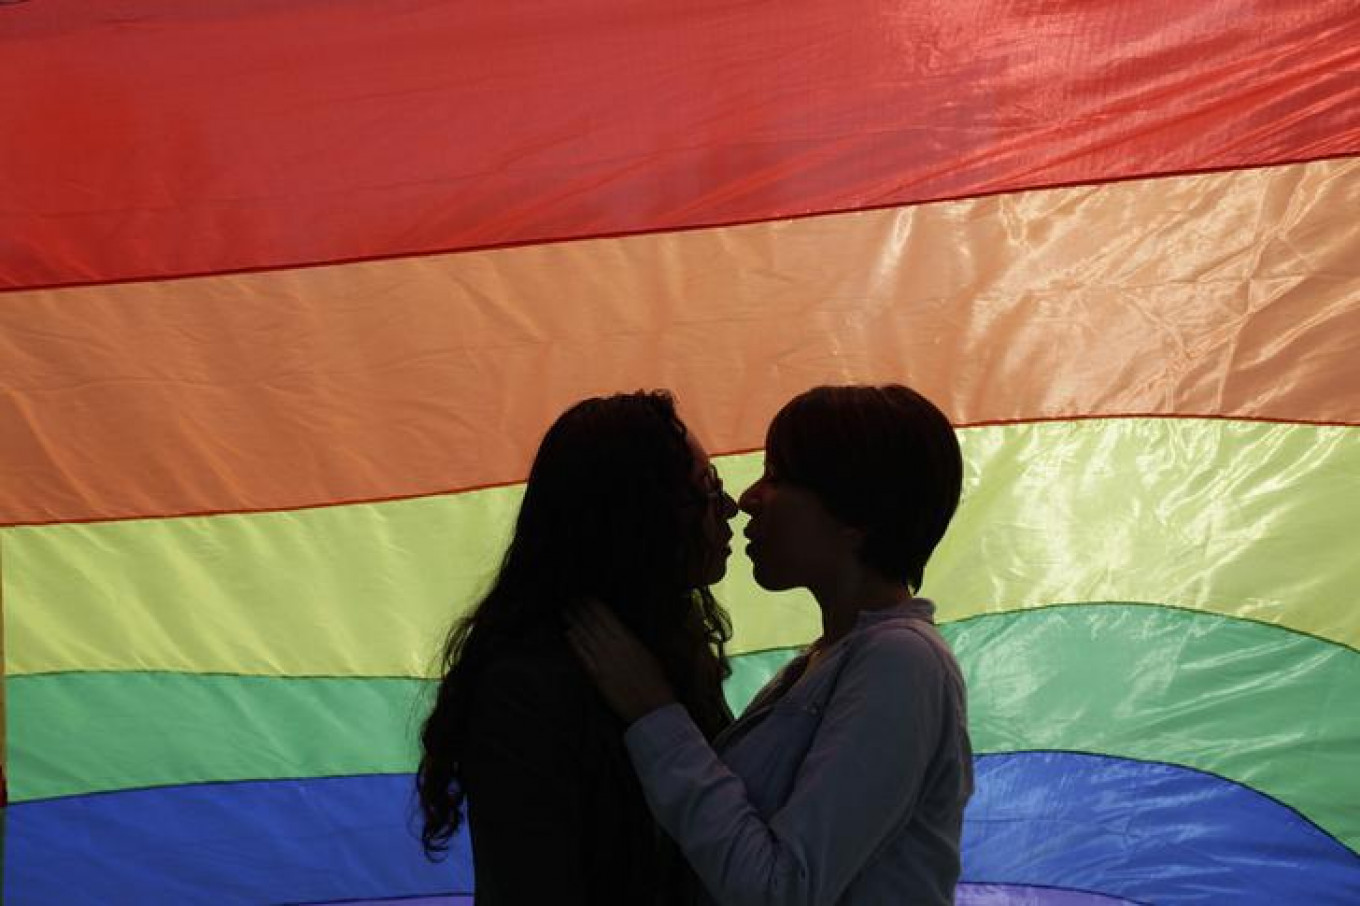 Barriers To The Right To Education For Lgbt Youth In Vietnam